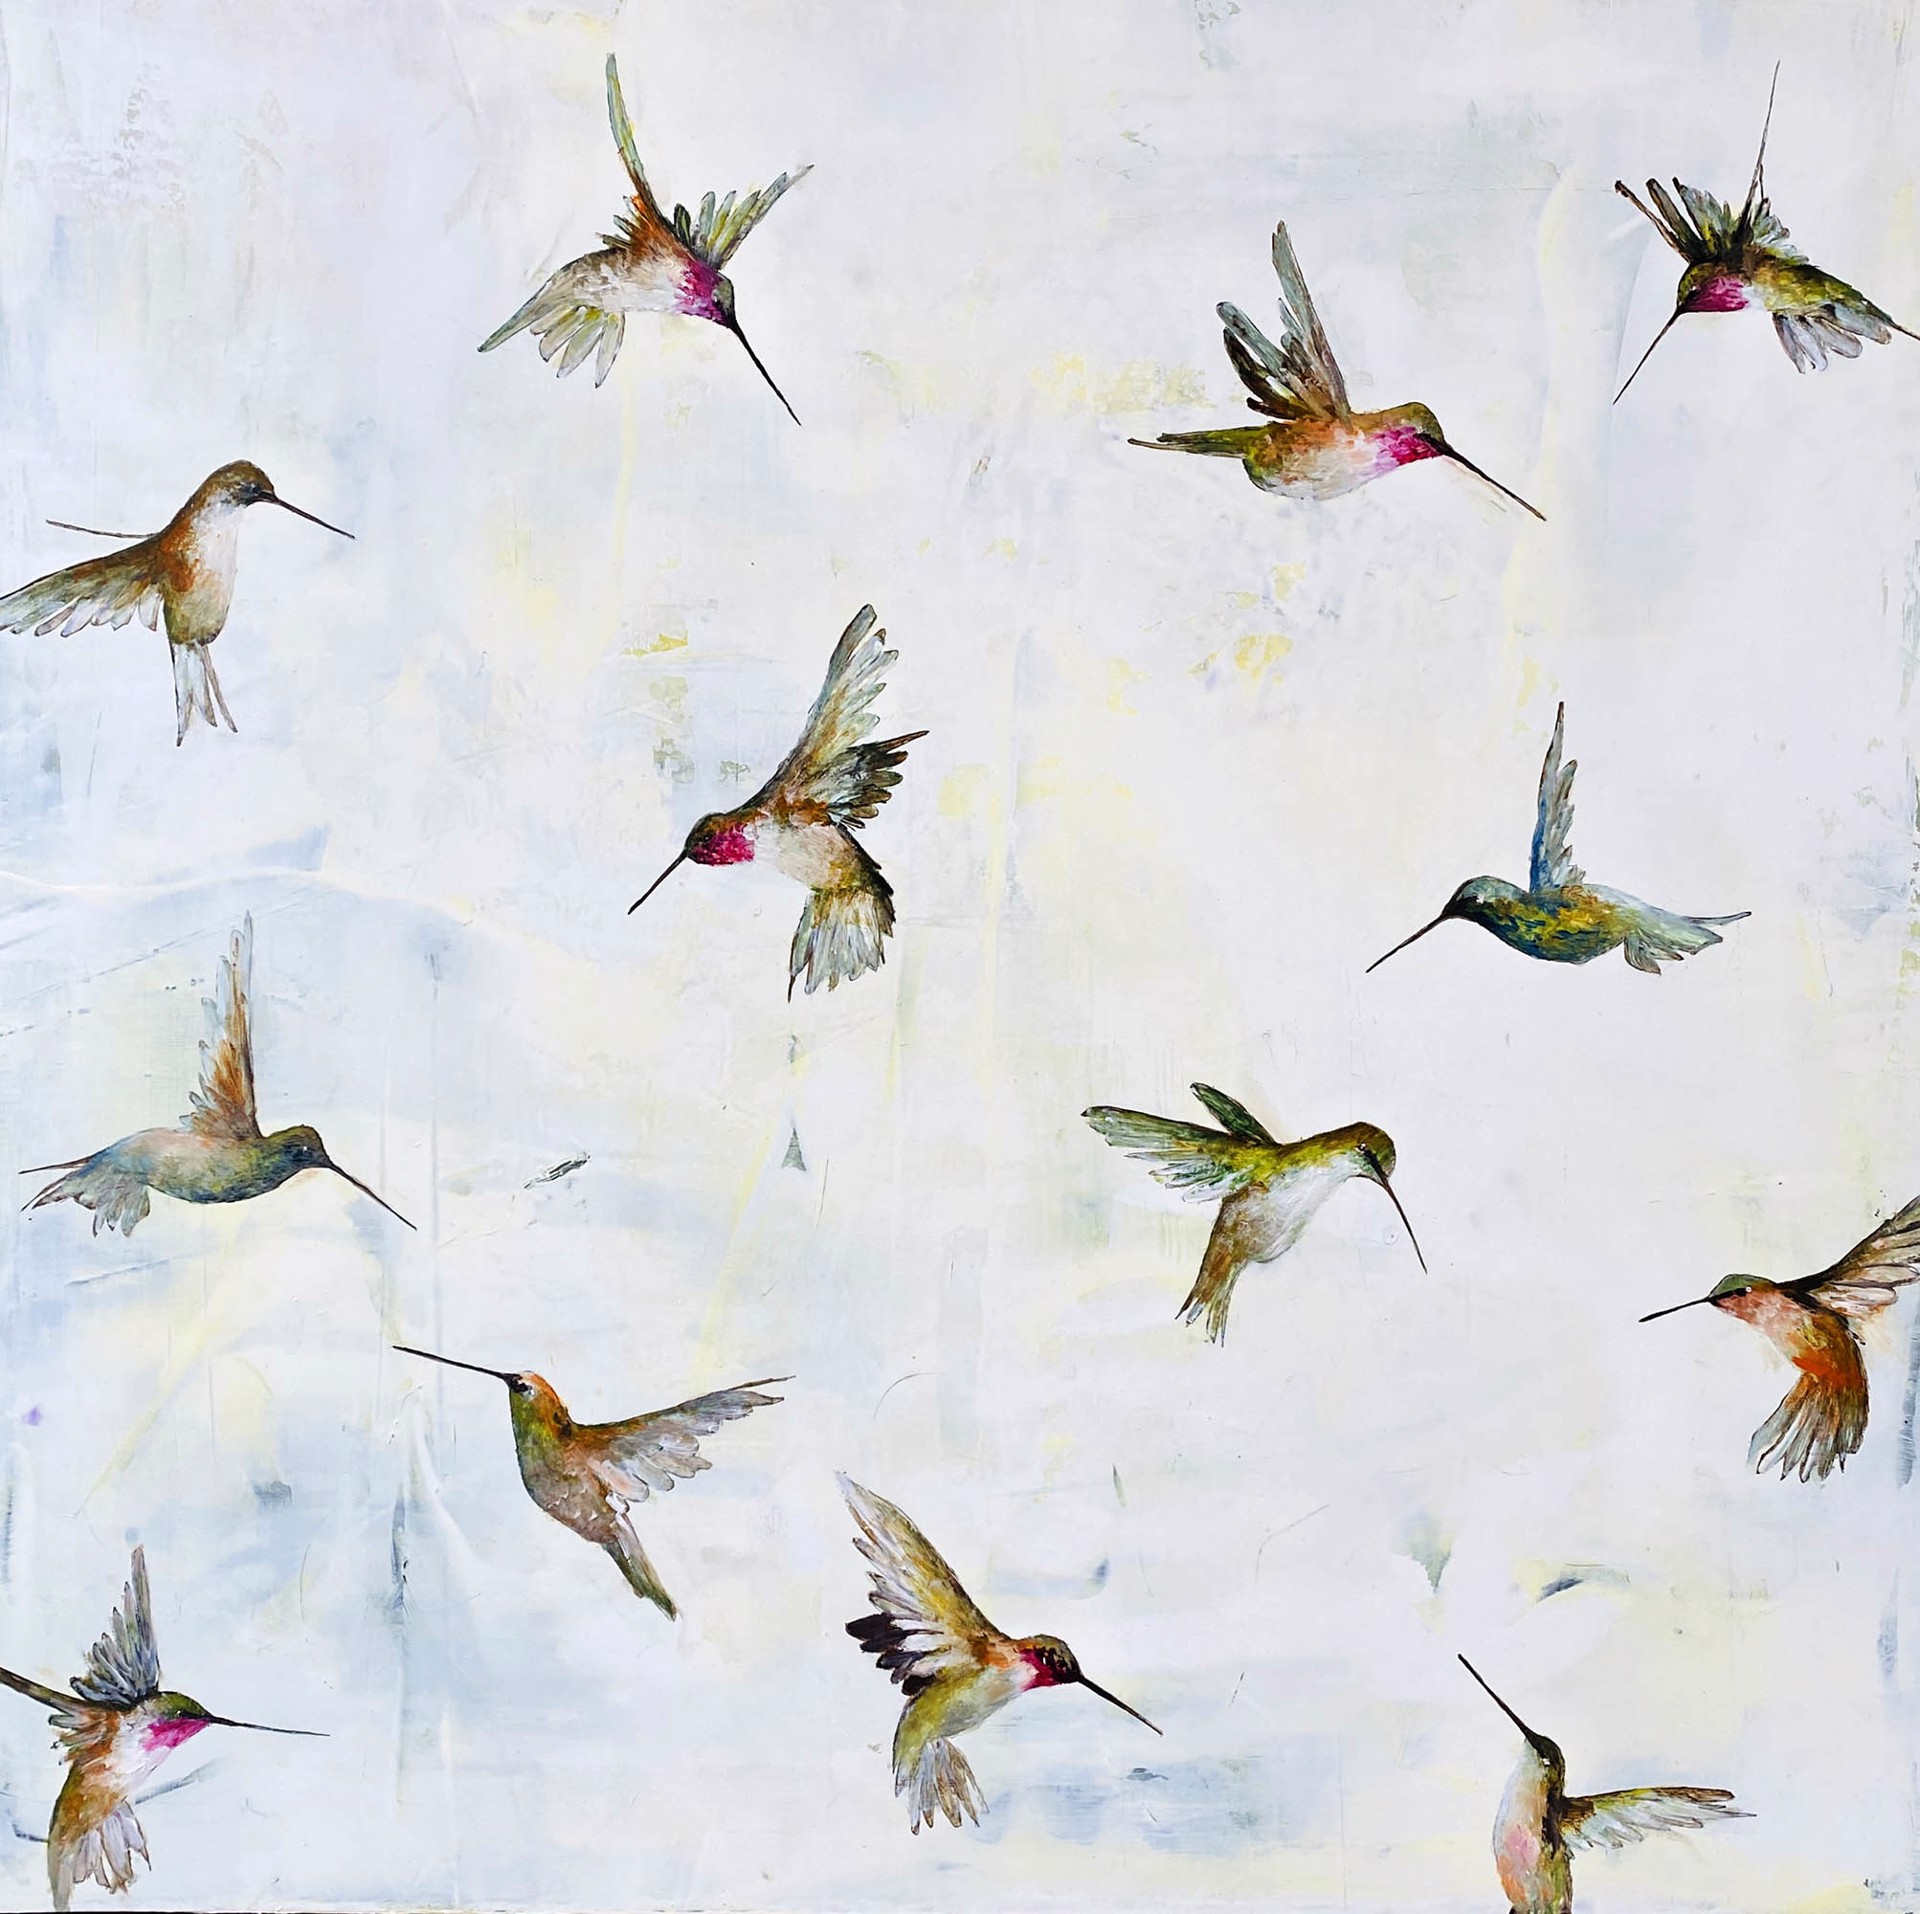 Original Oil Painting Featuring Spaced Out Hummingbirds In Flight Over Abstract Blue Gray Background